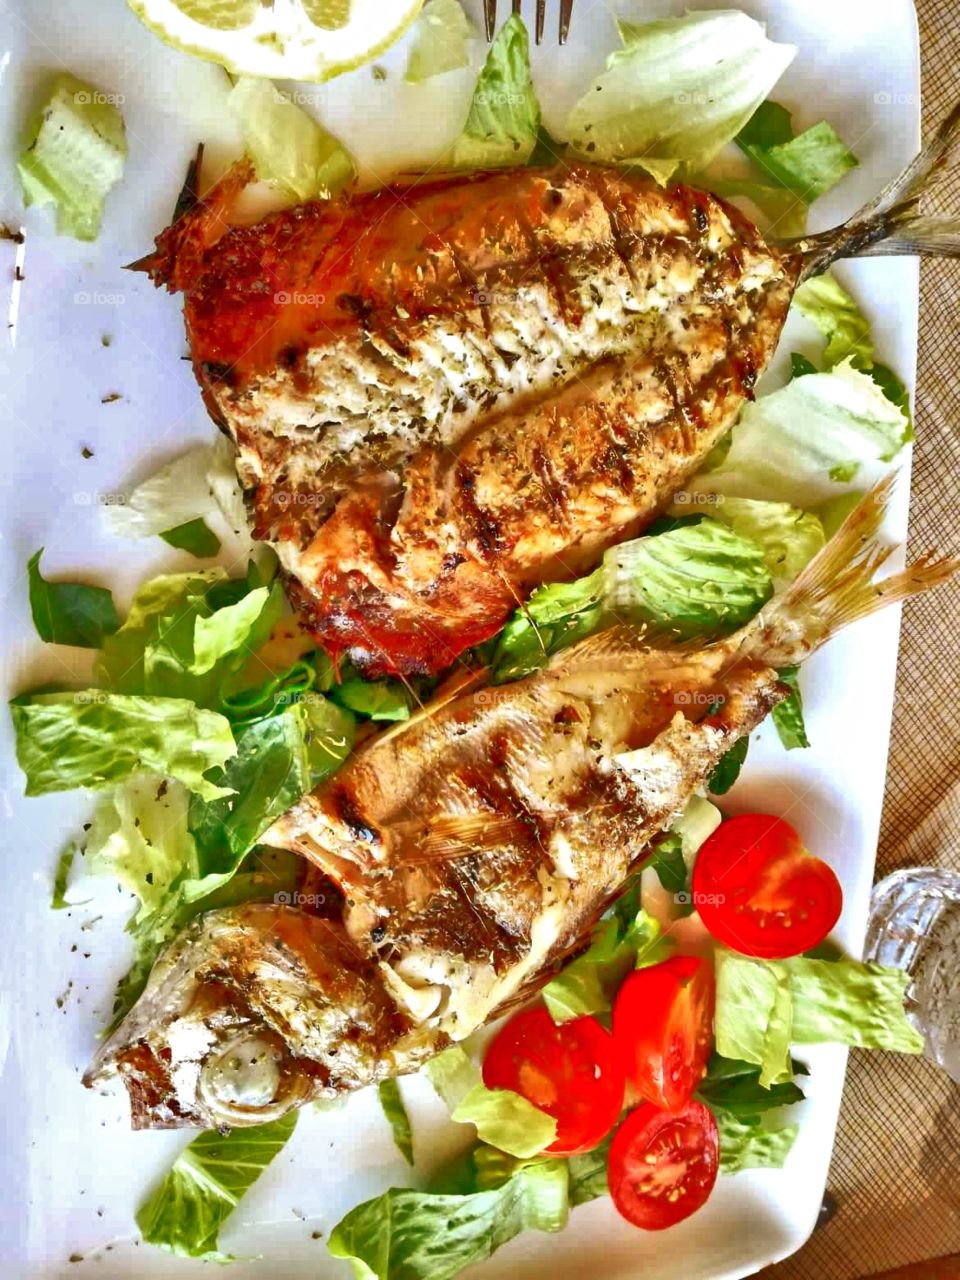 Tasty grilled fish with salad